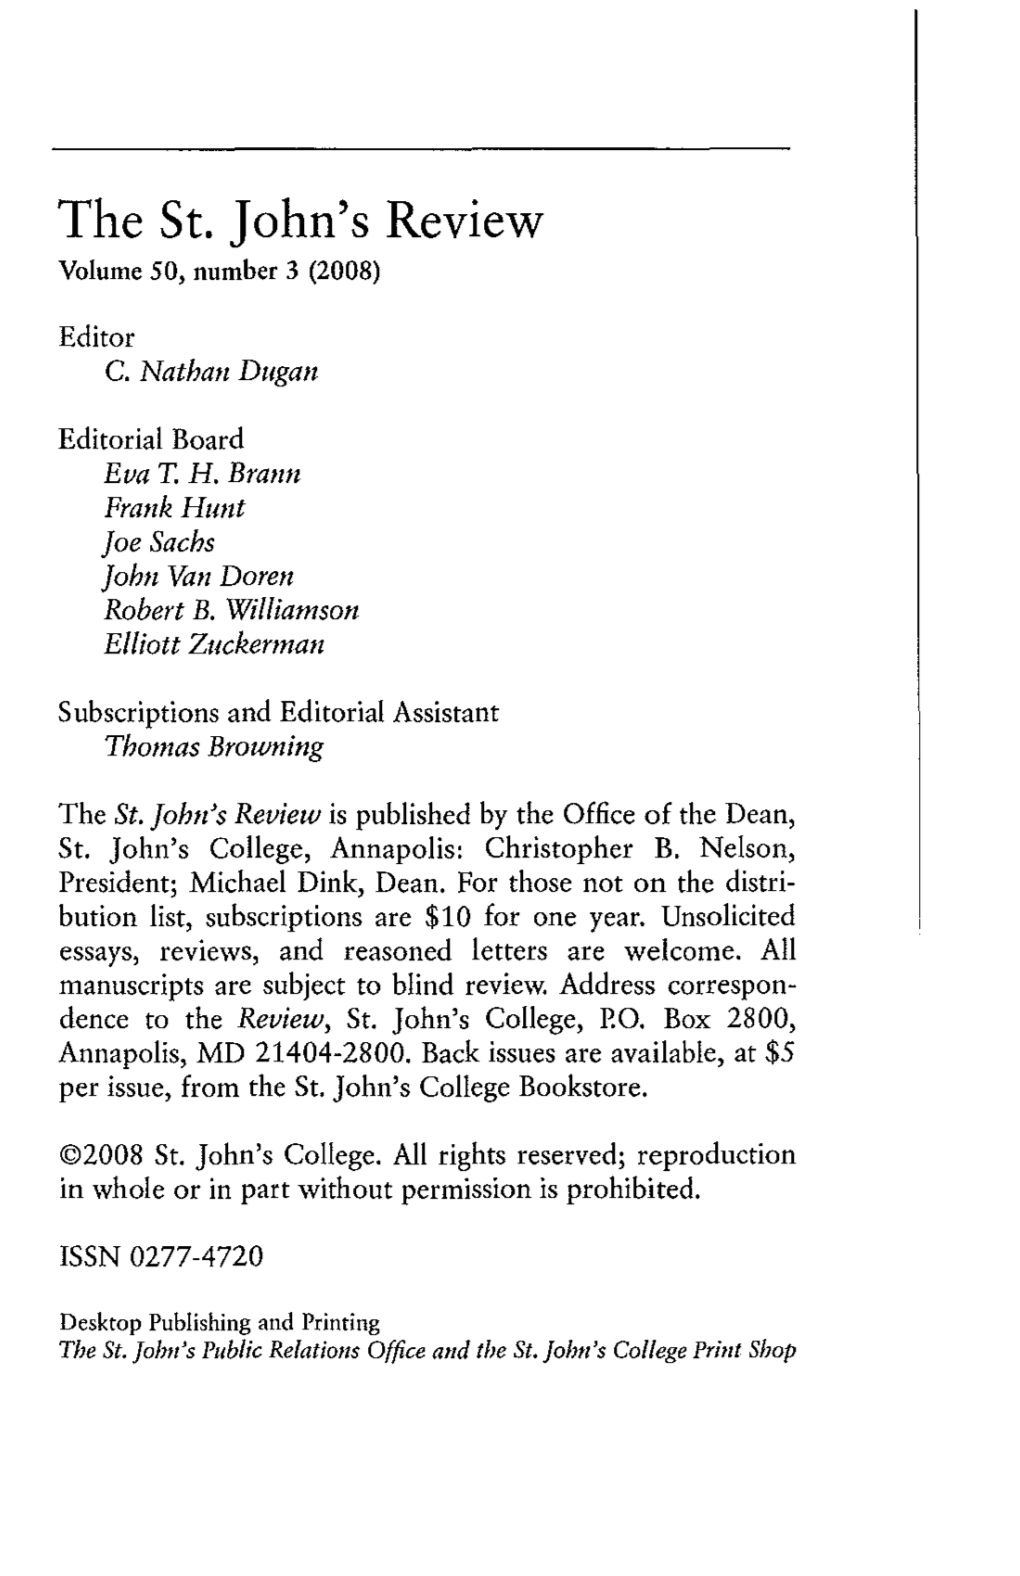 The St. John's Review Volume 50, Number 3 (2008)